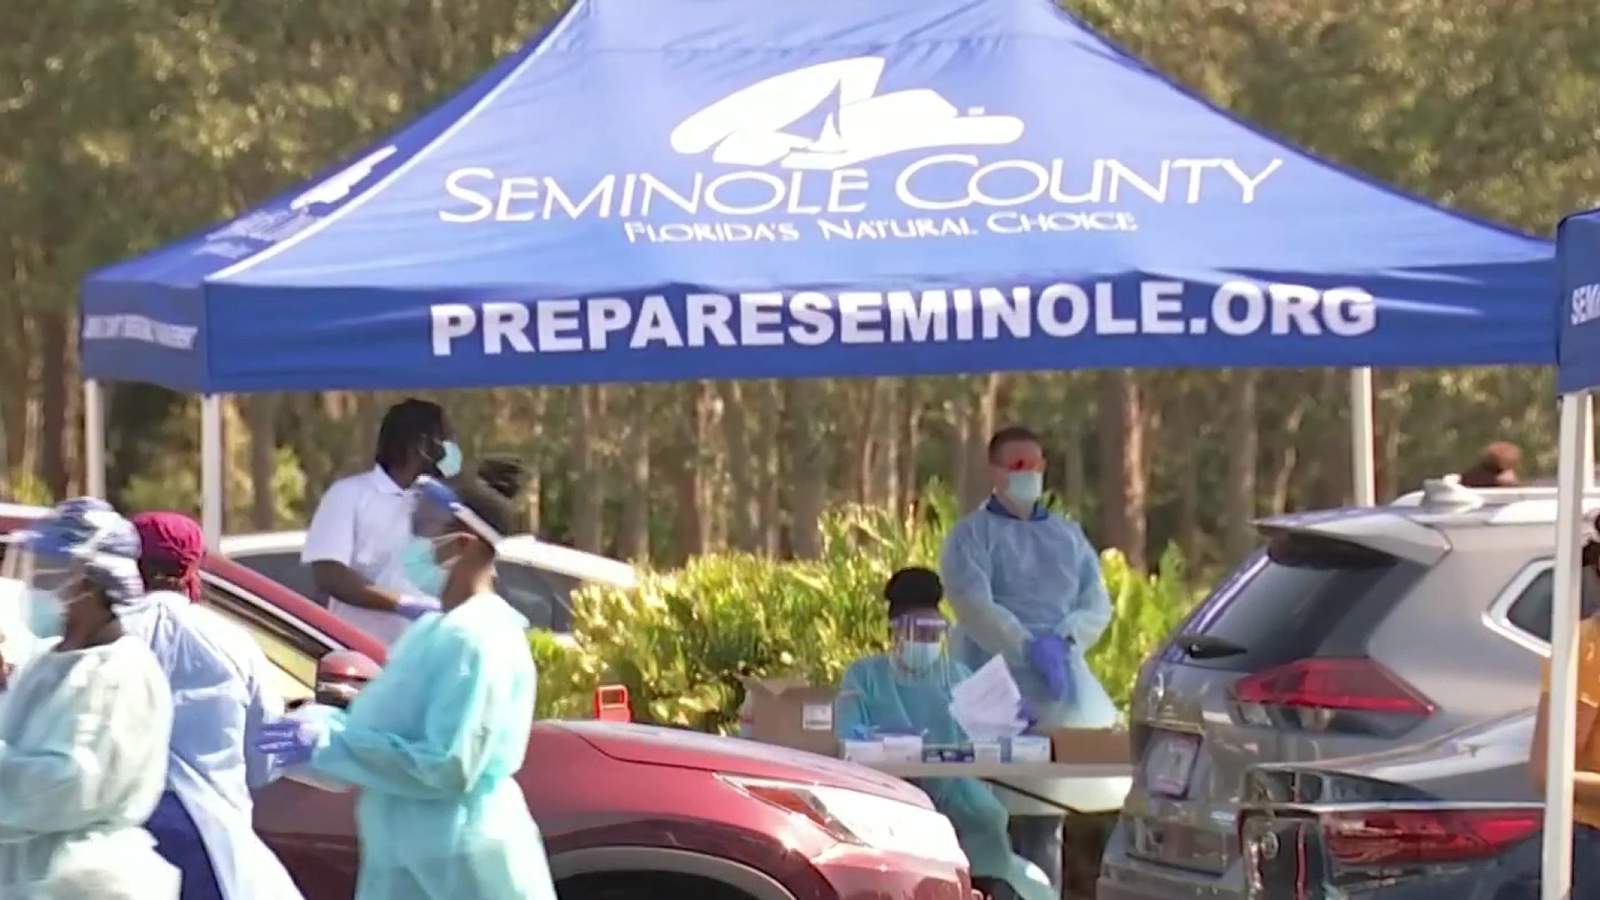 We have to do whats right: Seminole County leaders urge residents to take action against the spread of COVID-19